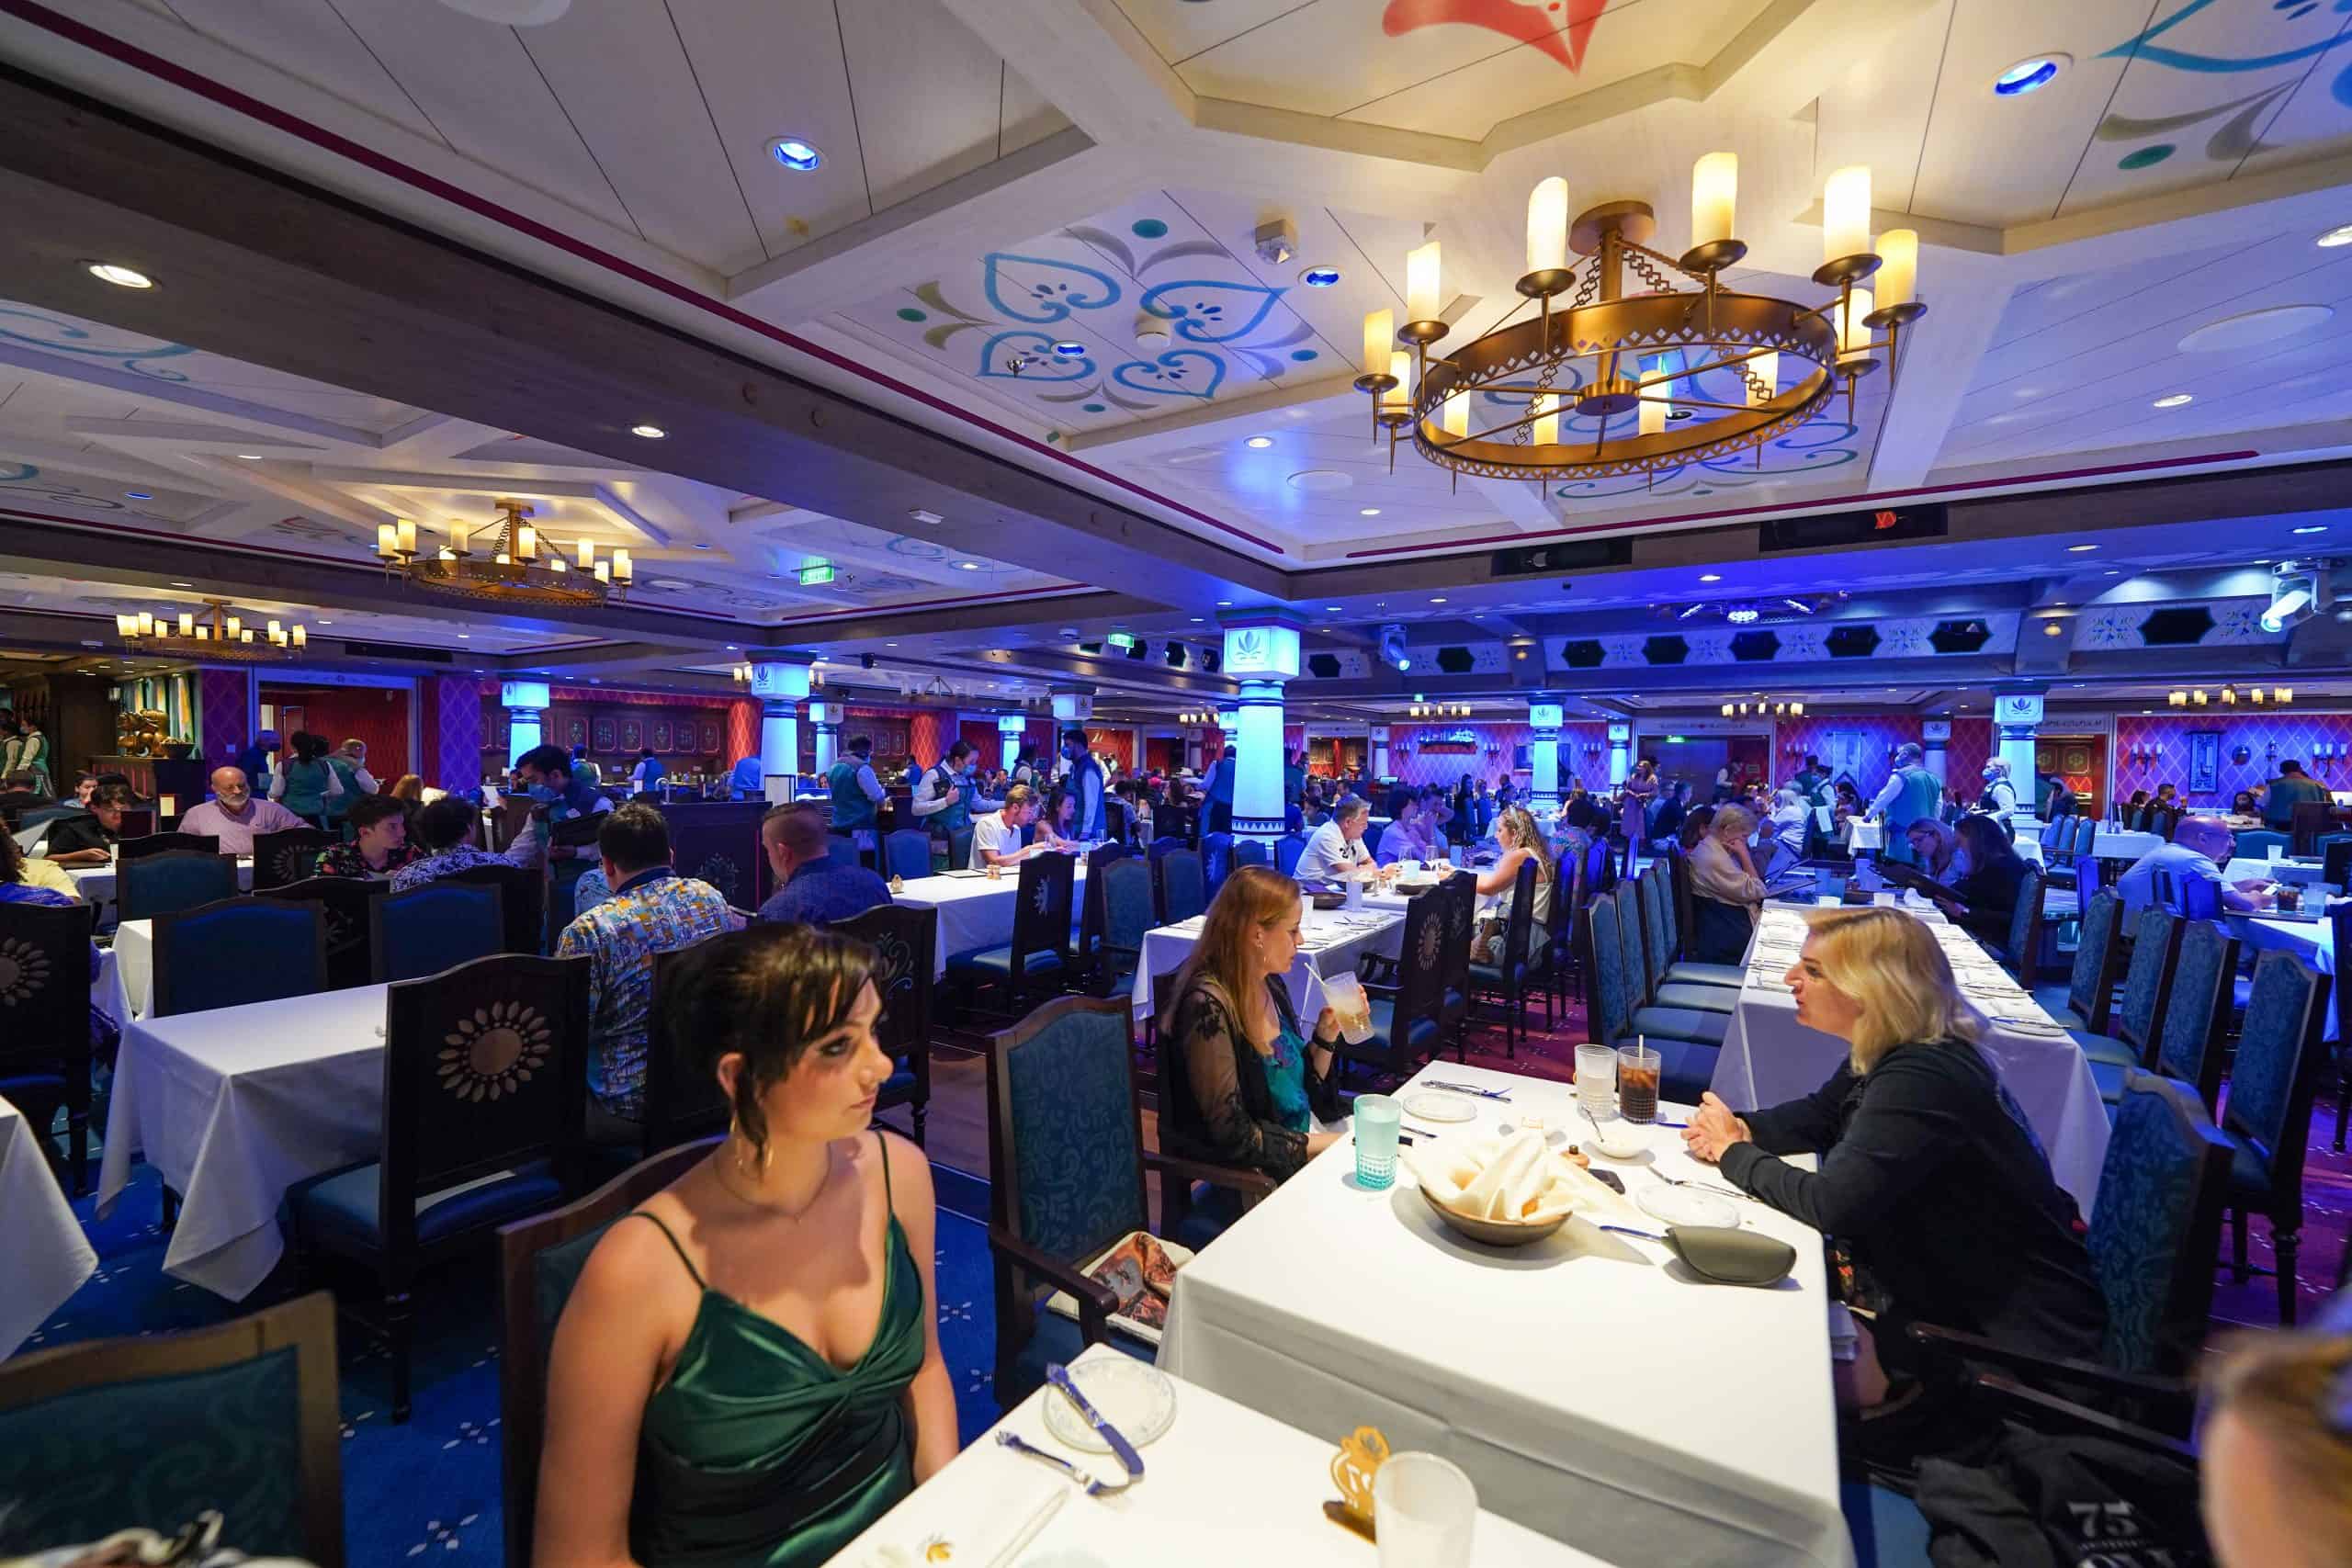 Disney Wish Cruise Line Dinner Shows Are Next Level - Pixie Vacations